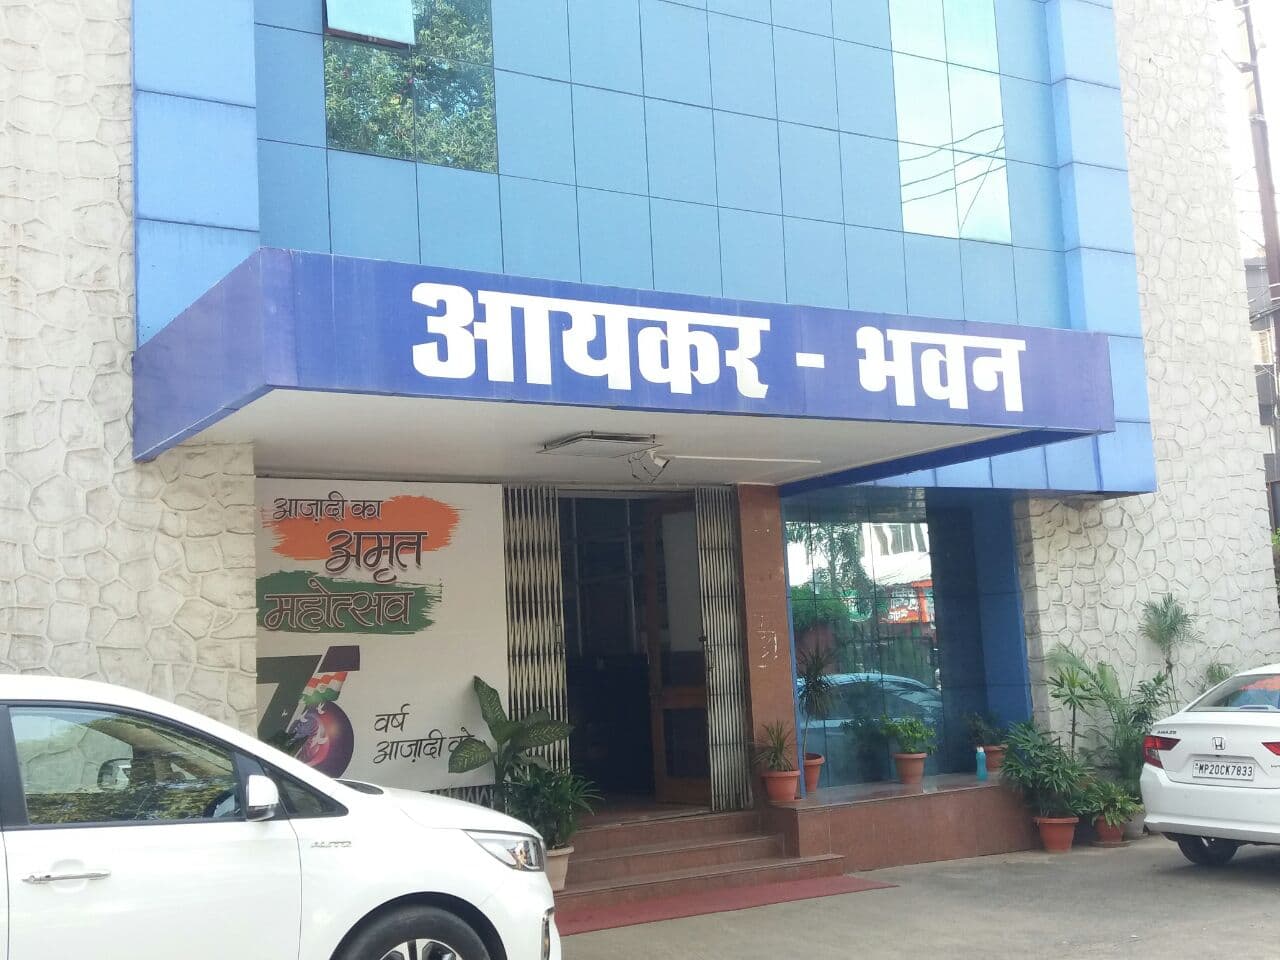 office of the Commissioner of Income Tax in Jabalpur